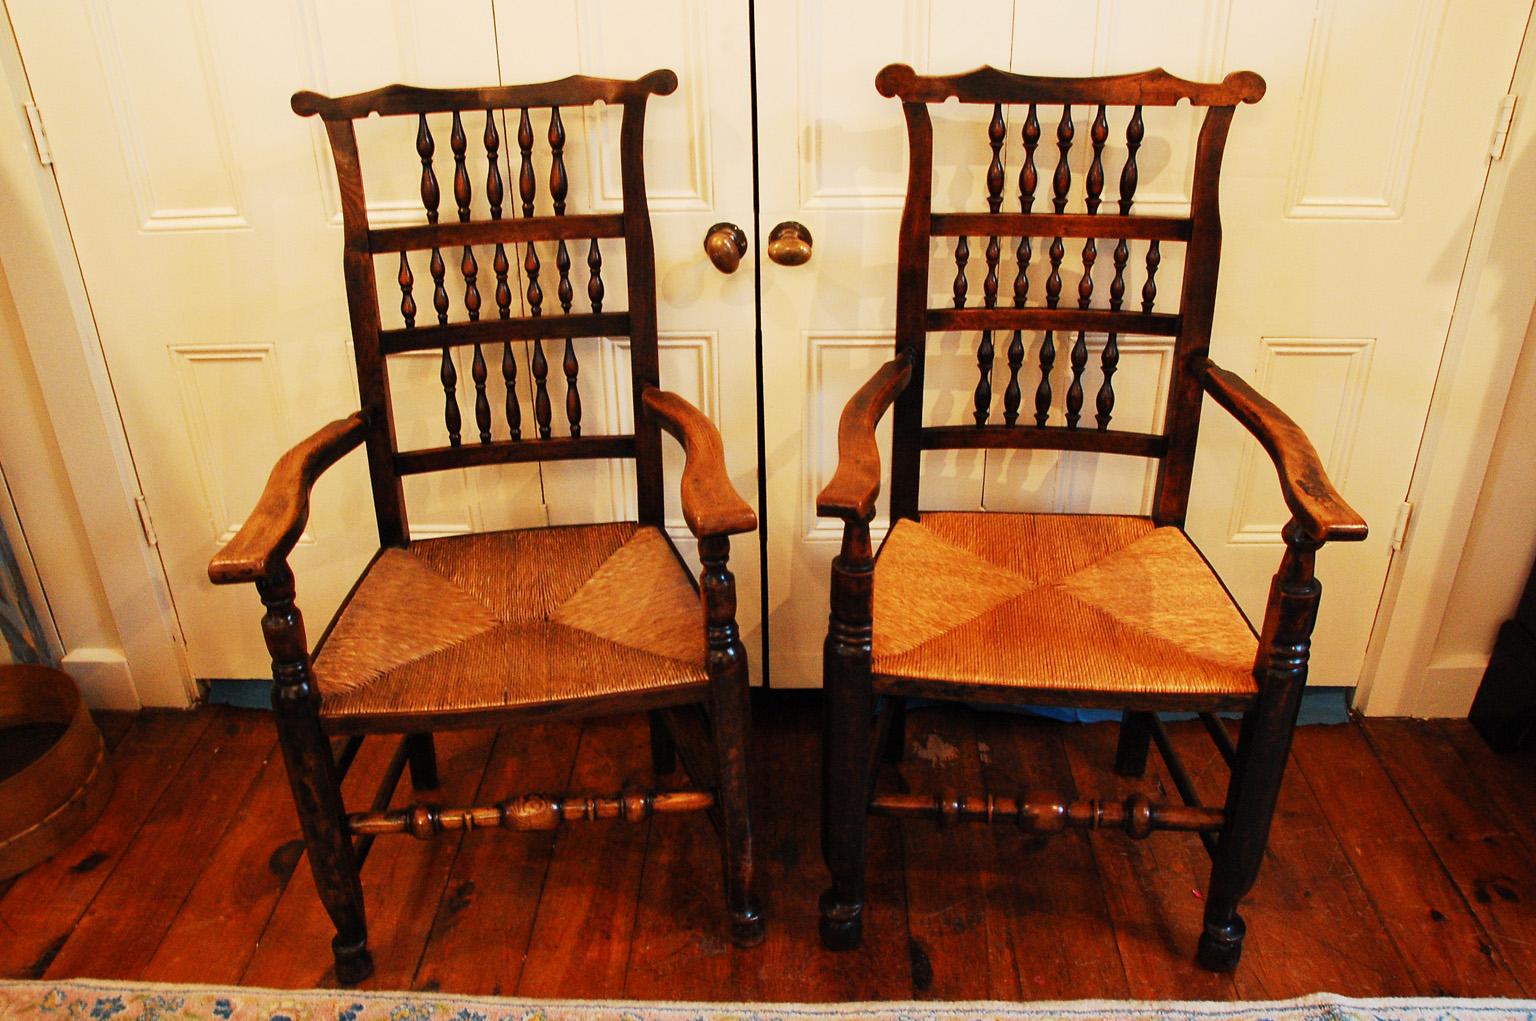 English early 19th century assembled set of eight spindleback elm and ash dining chairs including two armchairs and six sidechairs. These chairs were made in the Lancashire/Cheshire region of England and typically were purchased over a period of